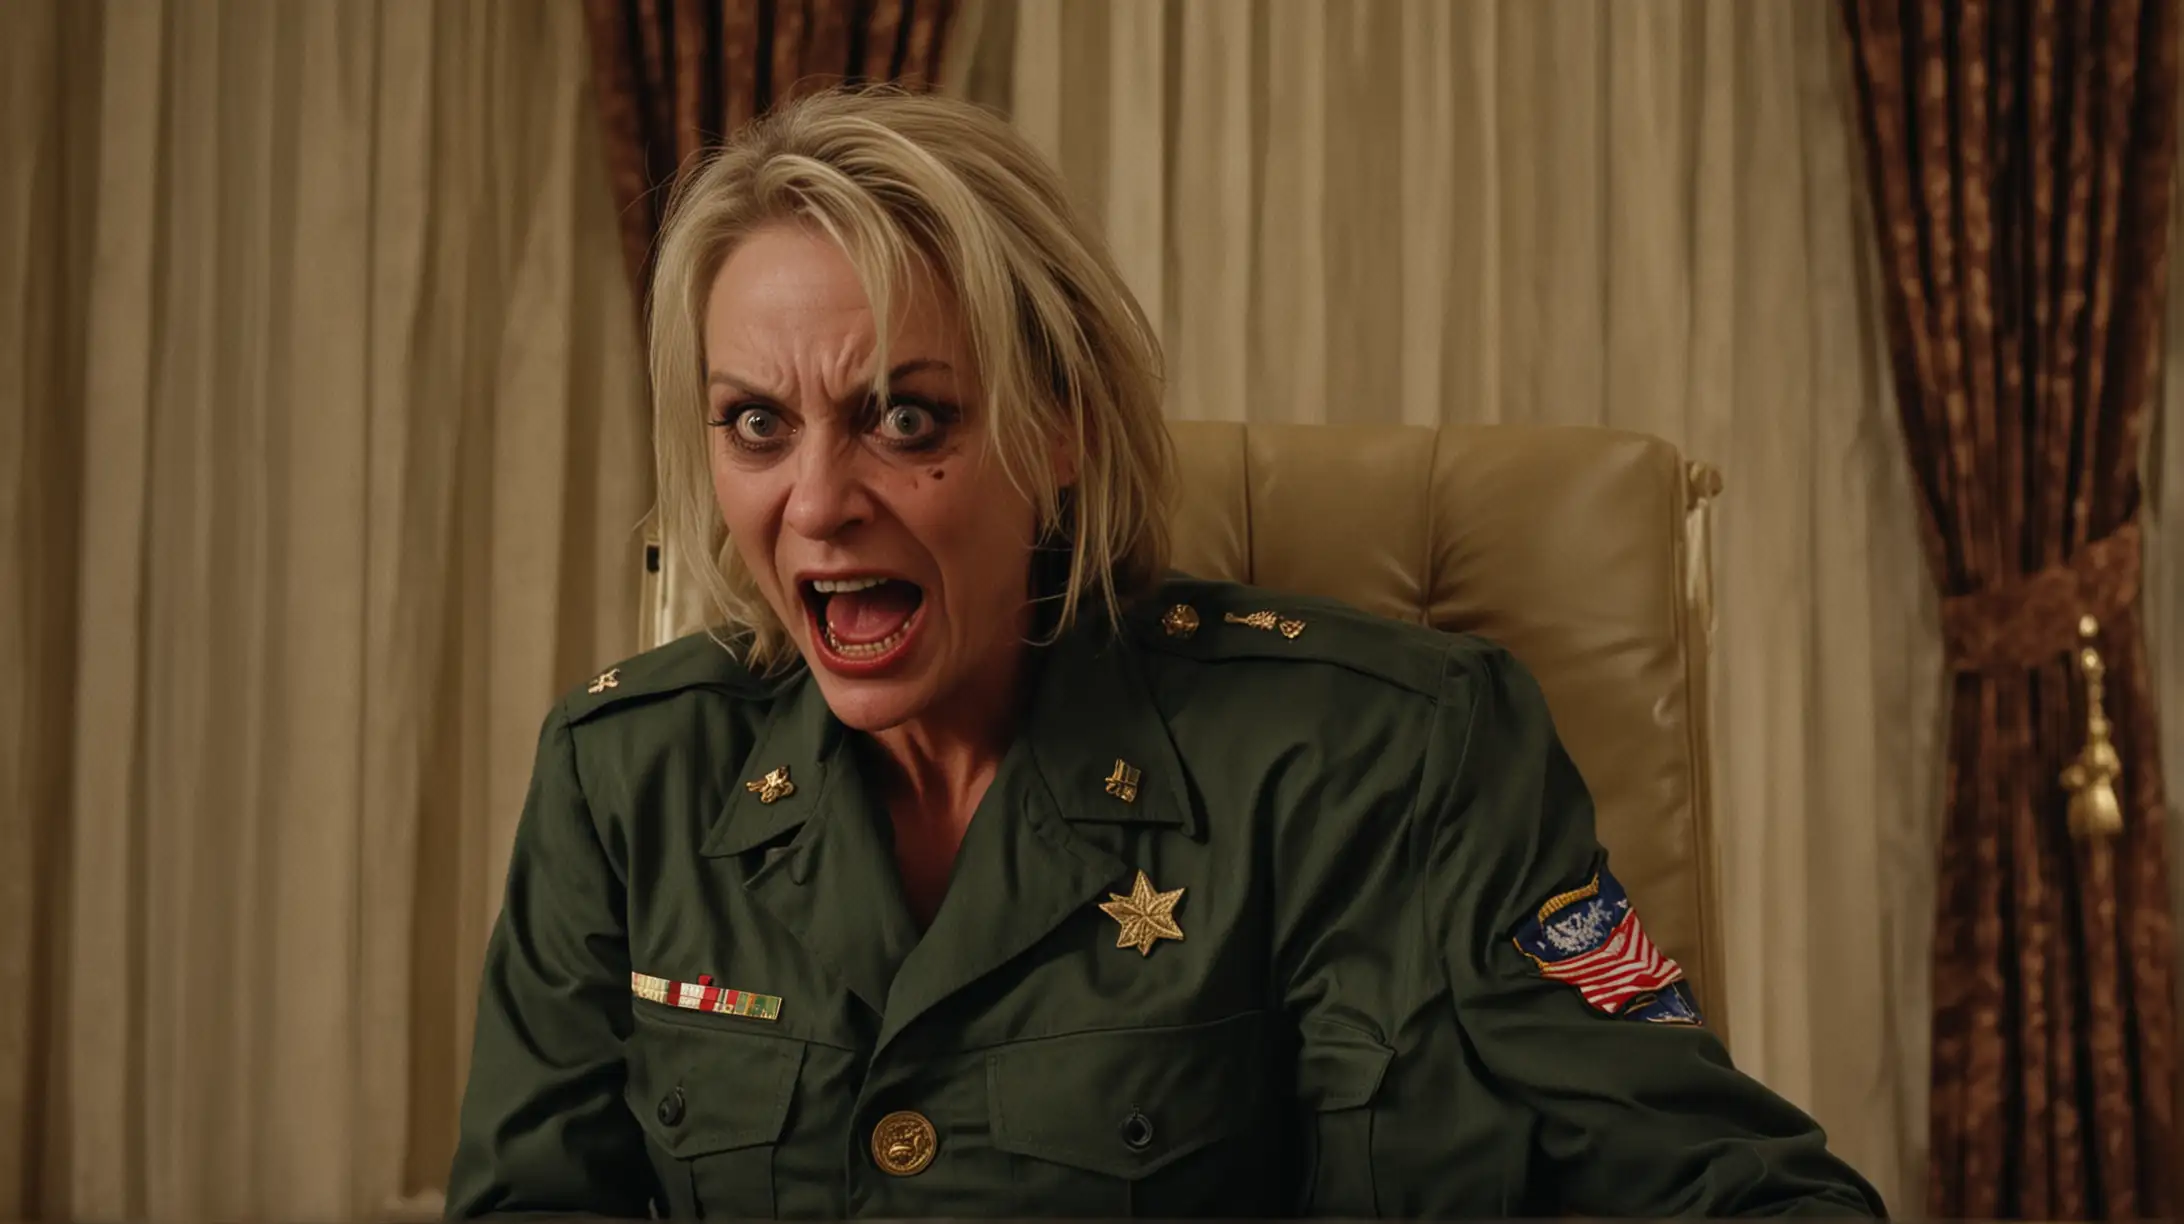 evil high ranking military woman, 55 yo, blonde,  scar on face, military jacket, psycho smile, angry, mad, furious, crazy eyes, seated on presidential chair, night, 70s crime movie style, super panavision 70